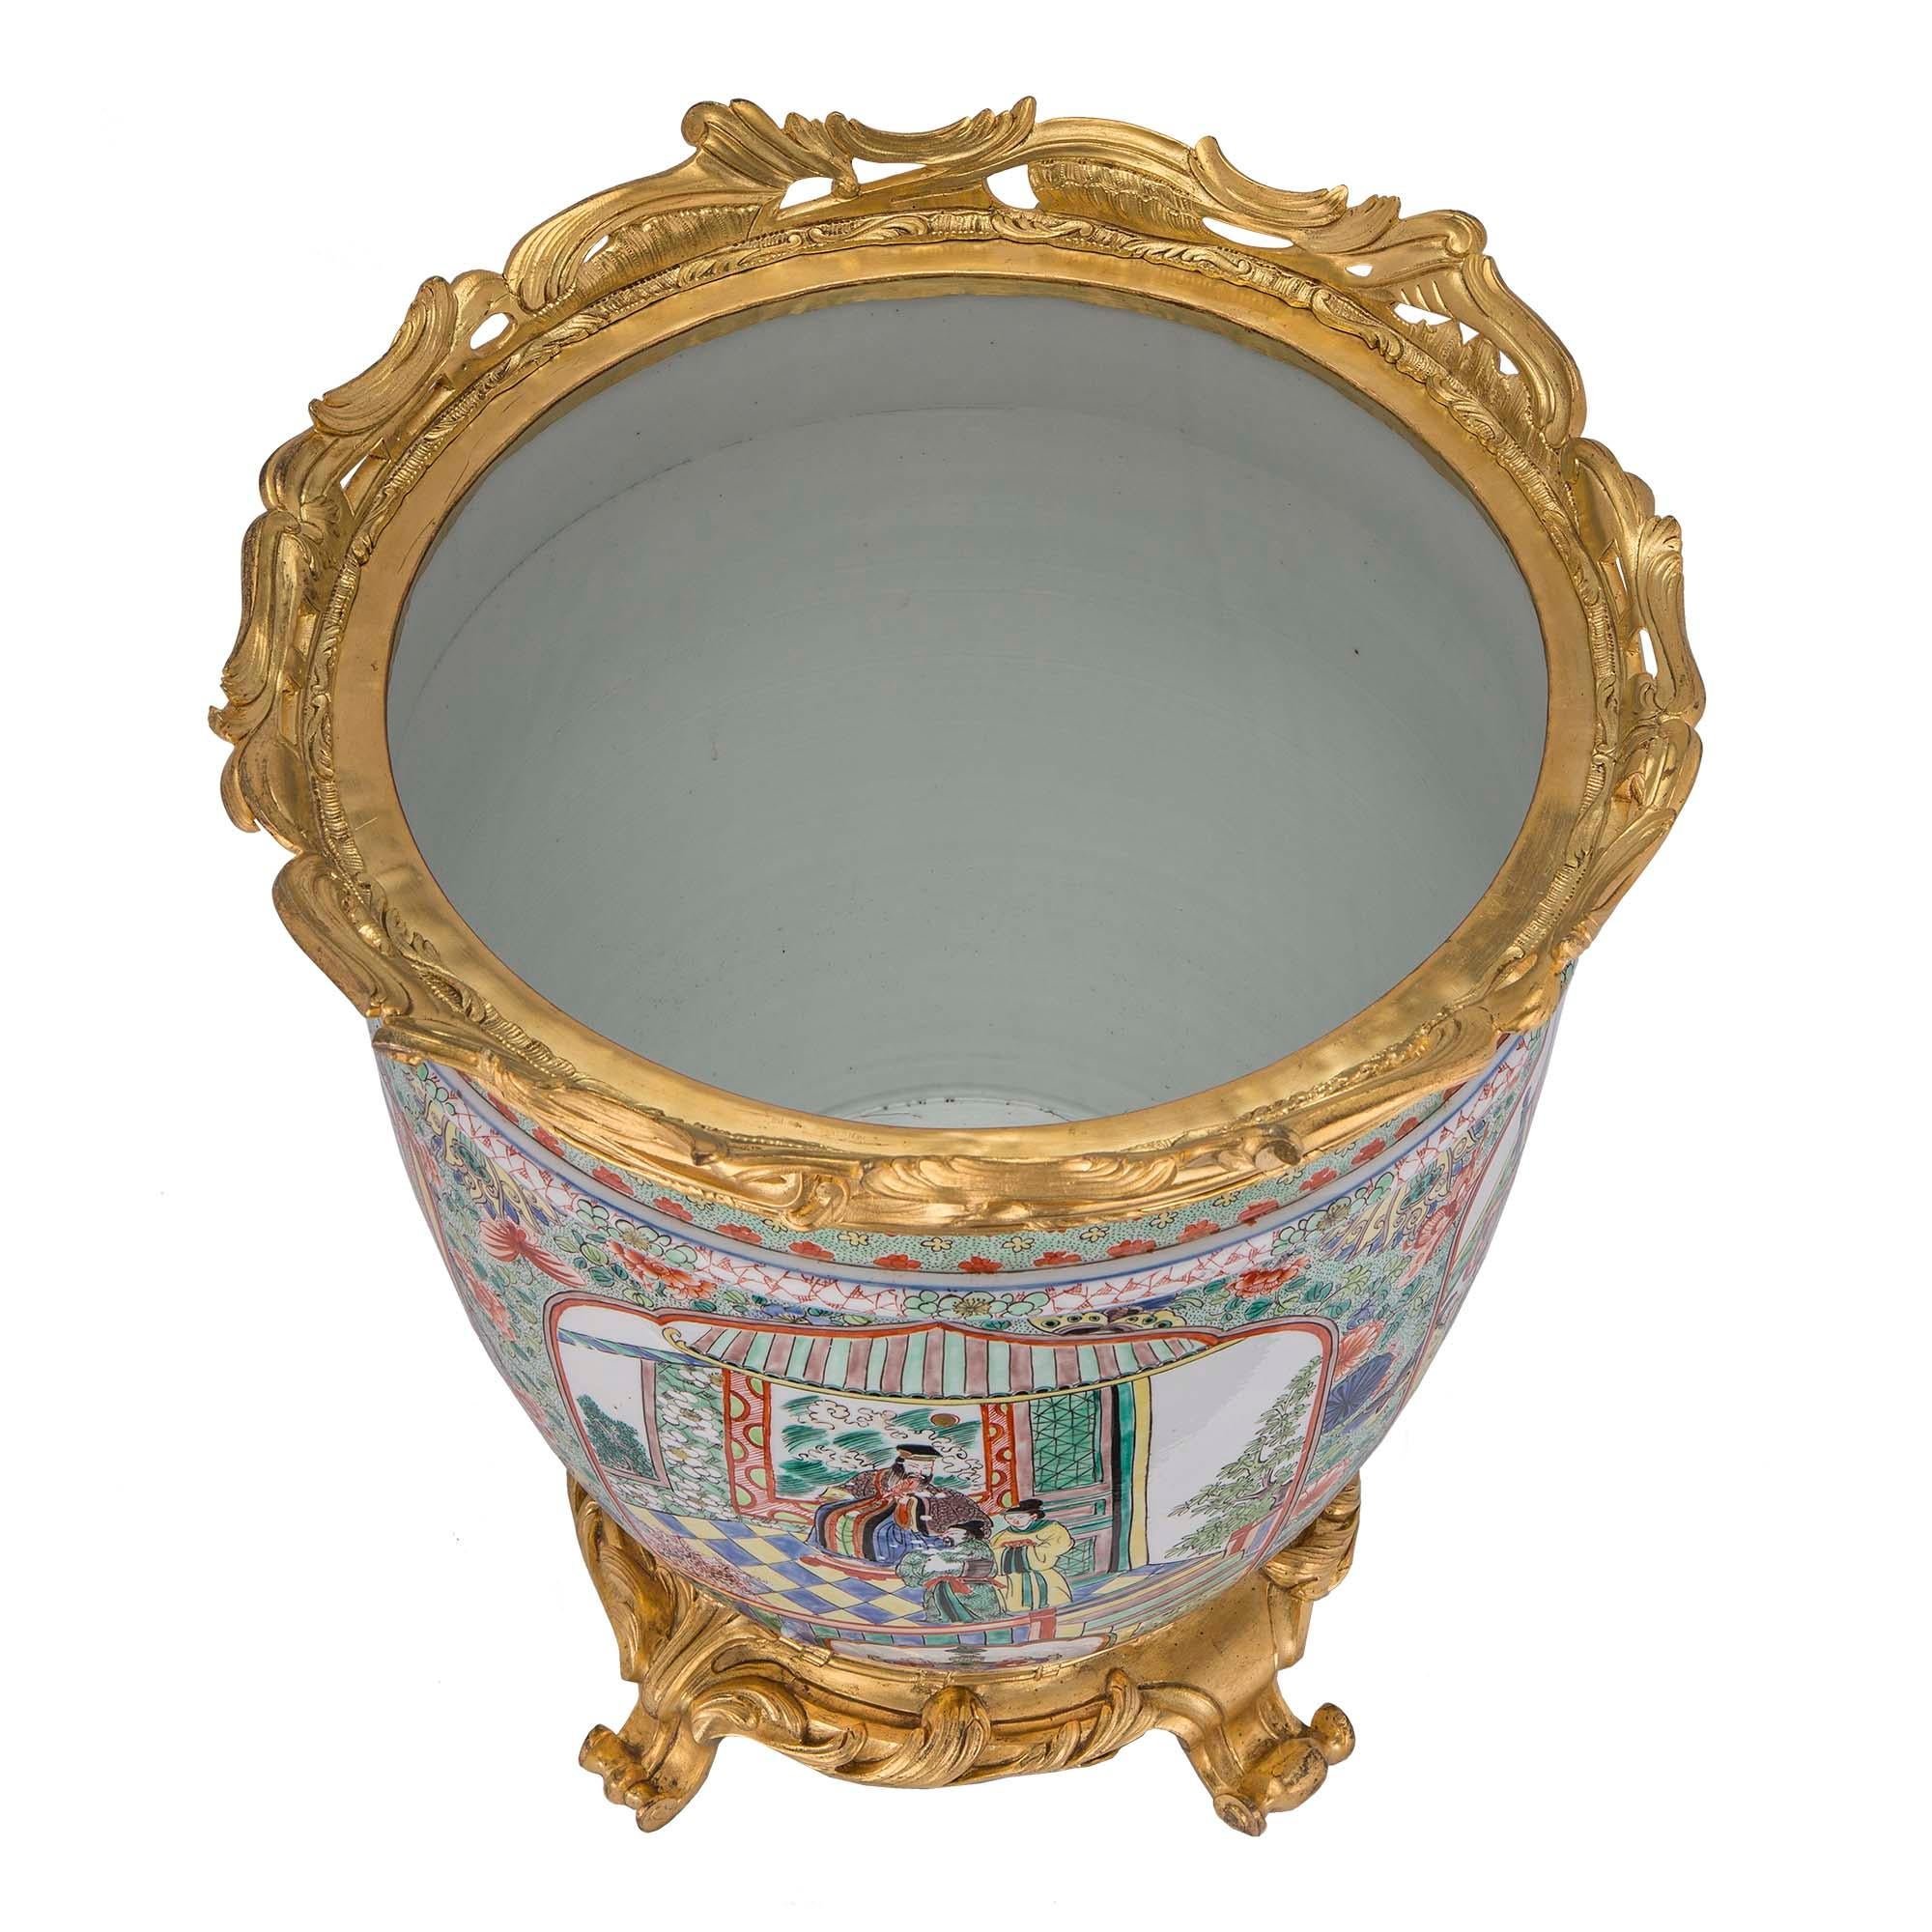 A very decorative 19th century Asian export Longuy porcelain urn with French 19th century Louis XV st. ormolu mounts. The urn is raised by scrolled ormolu feet below the finely chased ormolu base. Wonderful and richly hued handpainted hues decorate